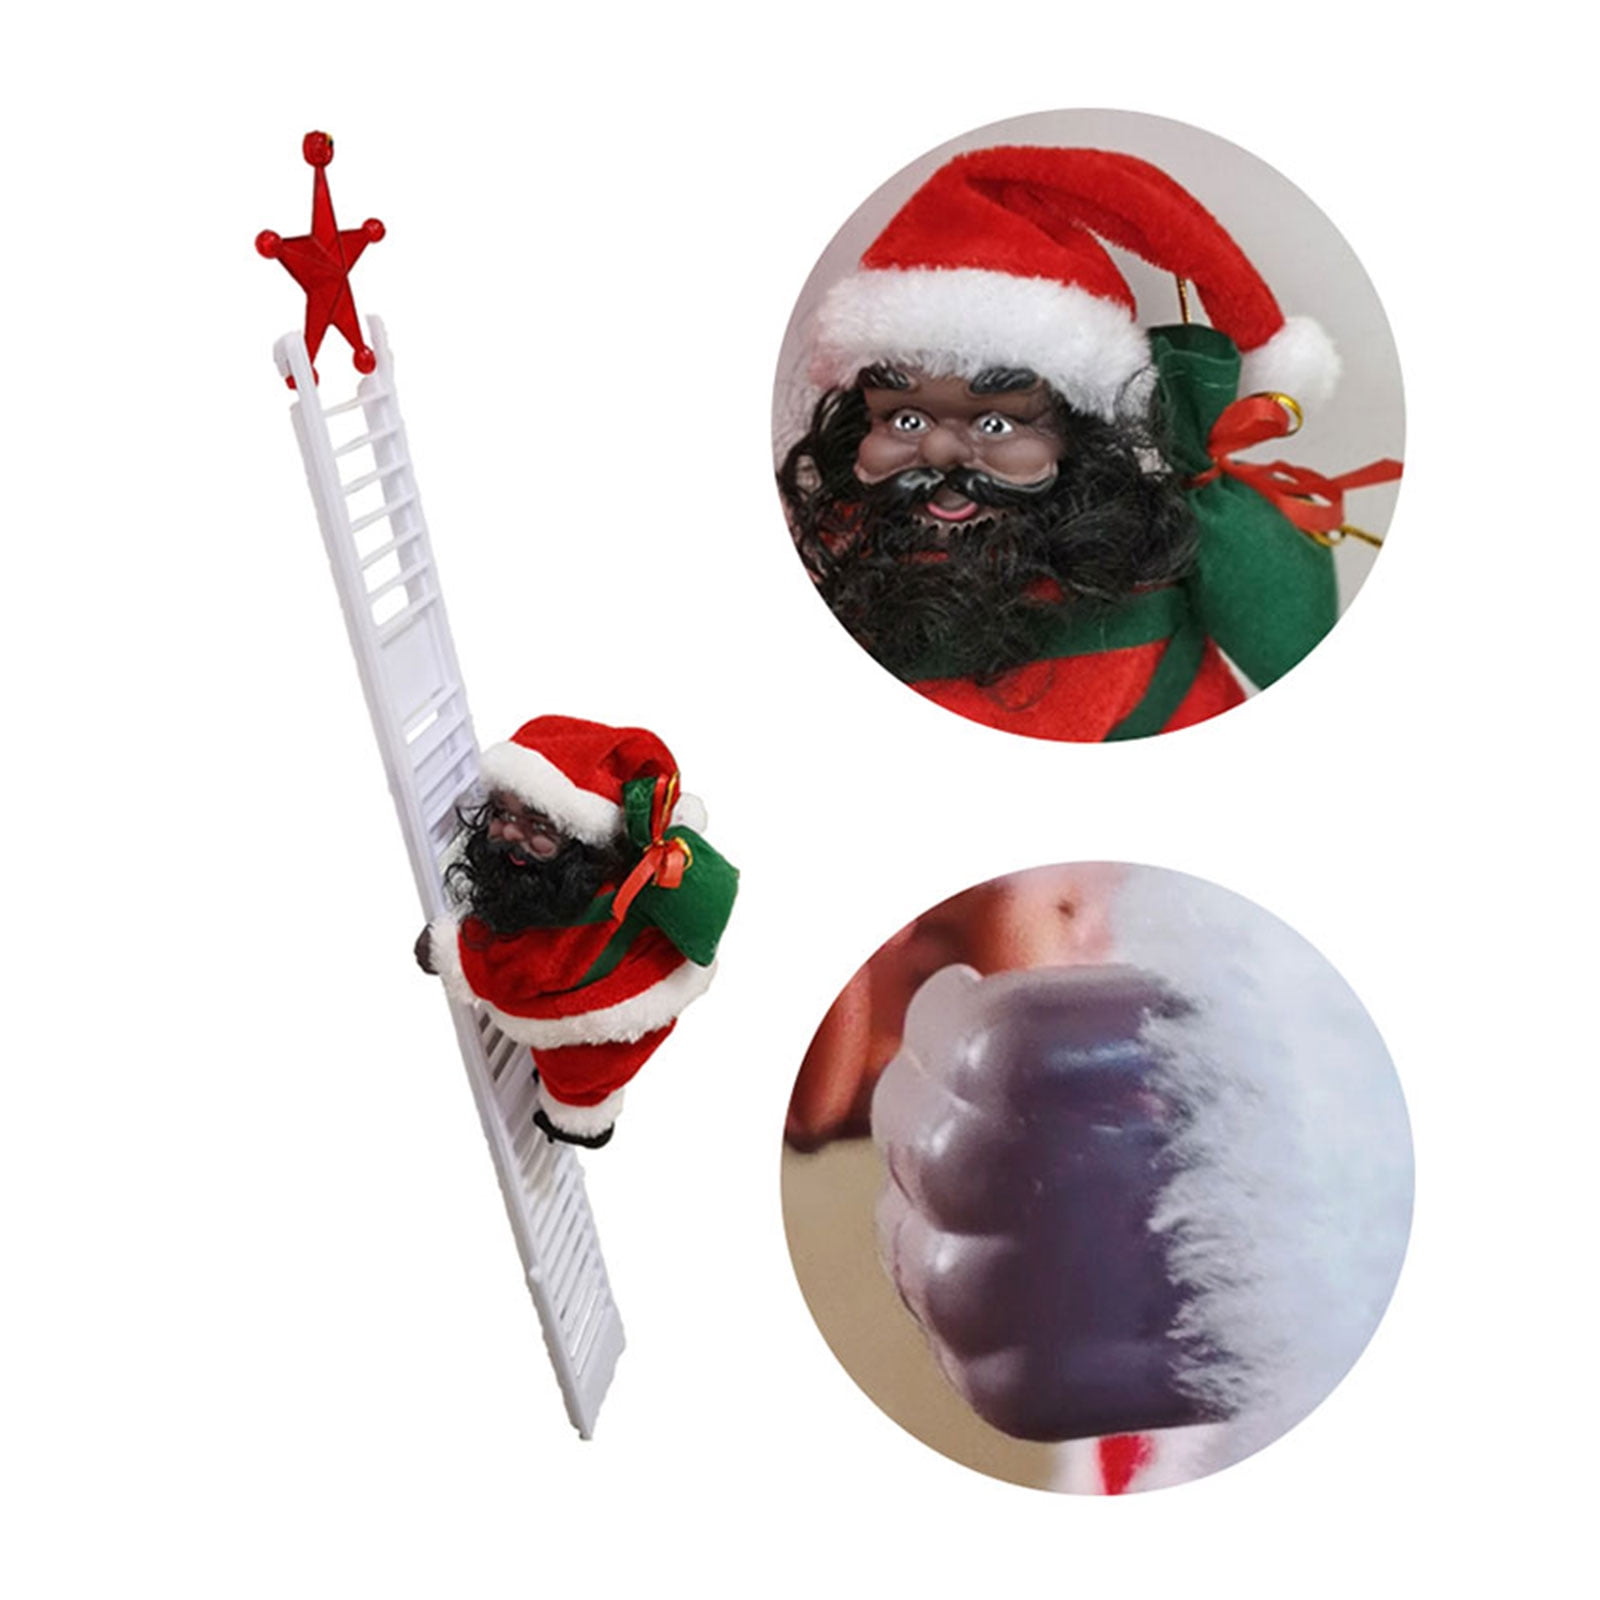 Details about   Electric Climbing Ladder Musical Santa Claus Christmas Tree  Decor Gifts 